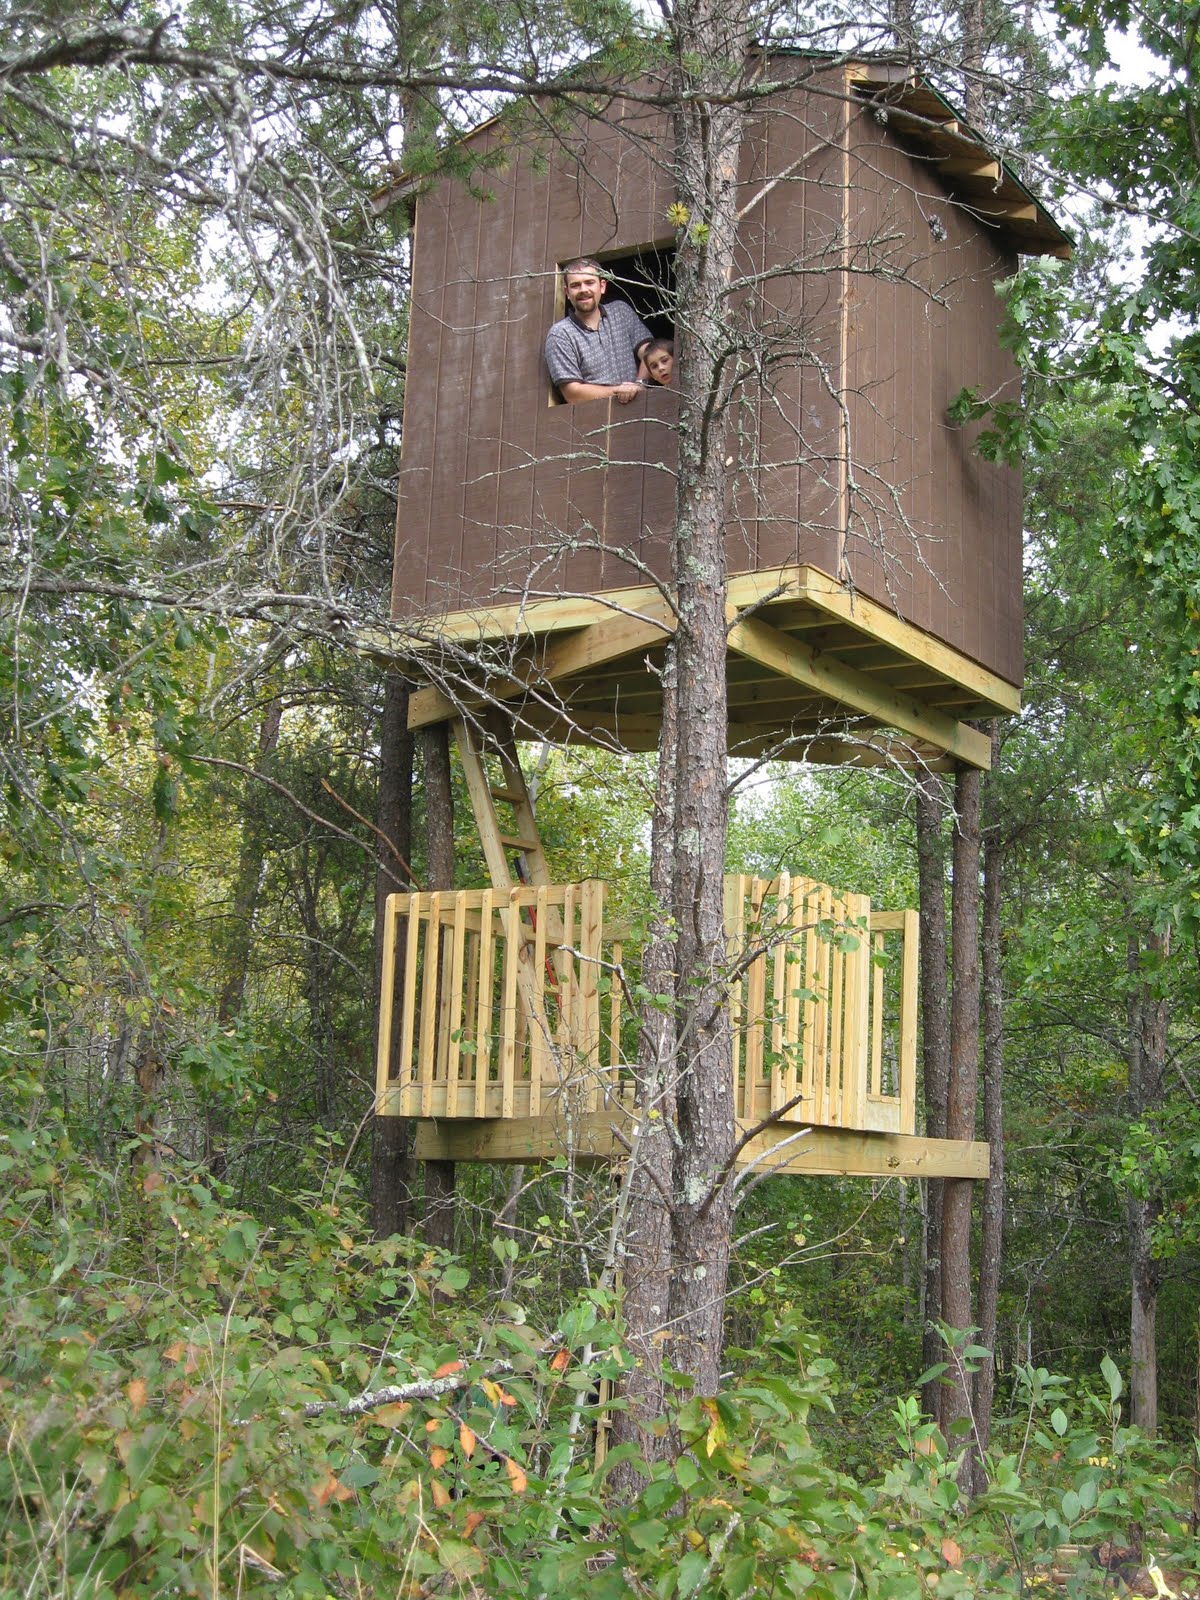 Proverbs 31 Living The story of a tree fort and simple 